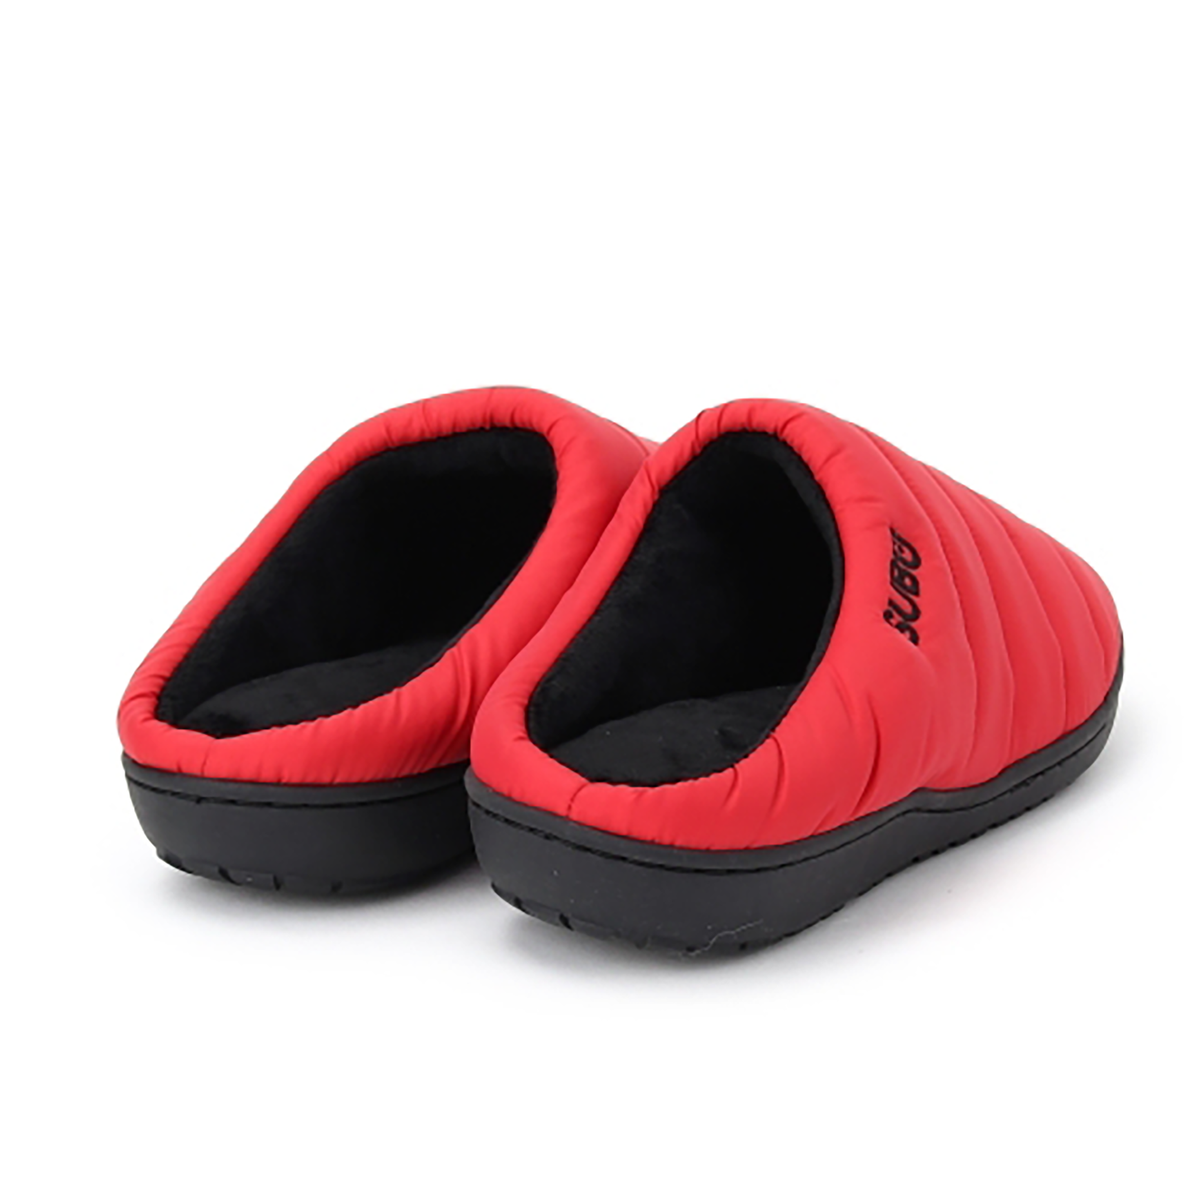 SUBU, Fall & Winter Slippers Red, Size, 0, Slippers,